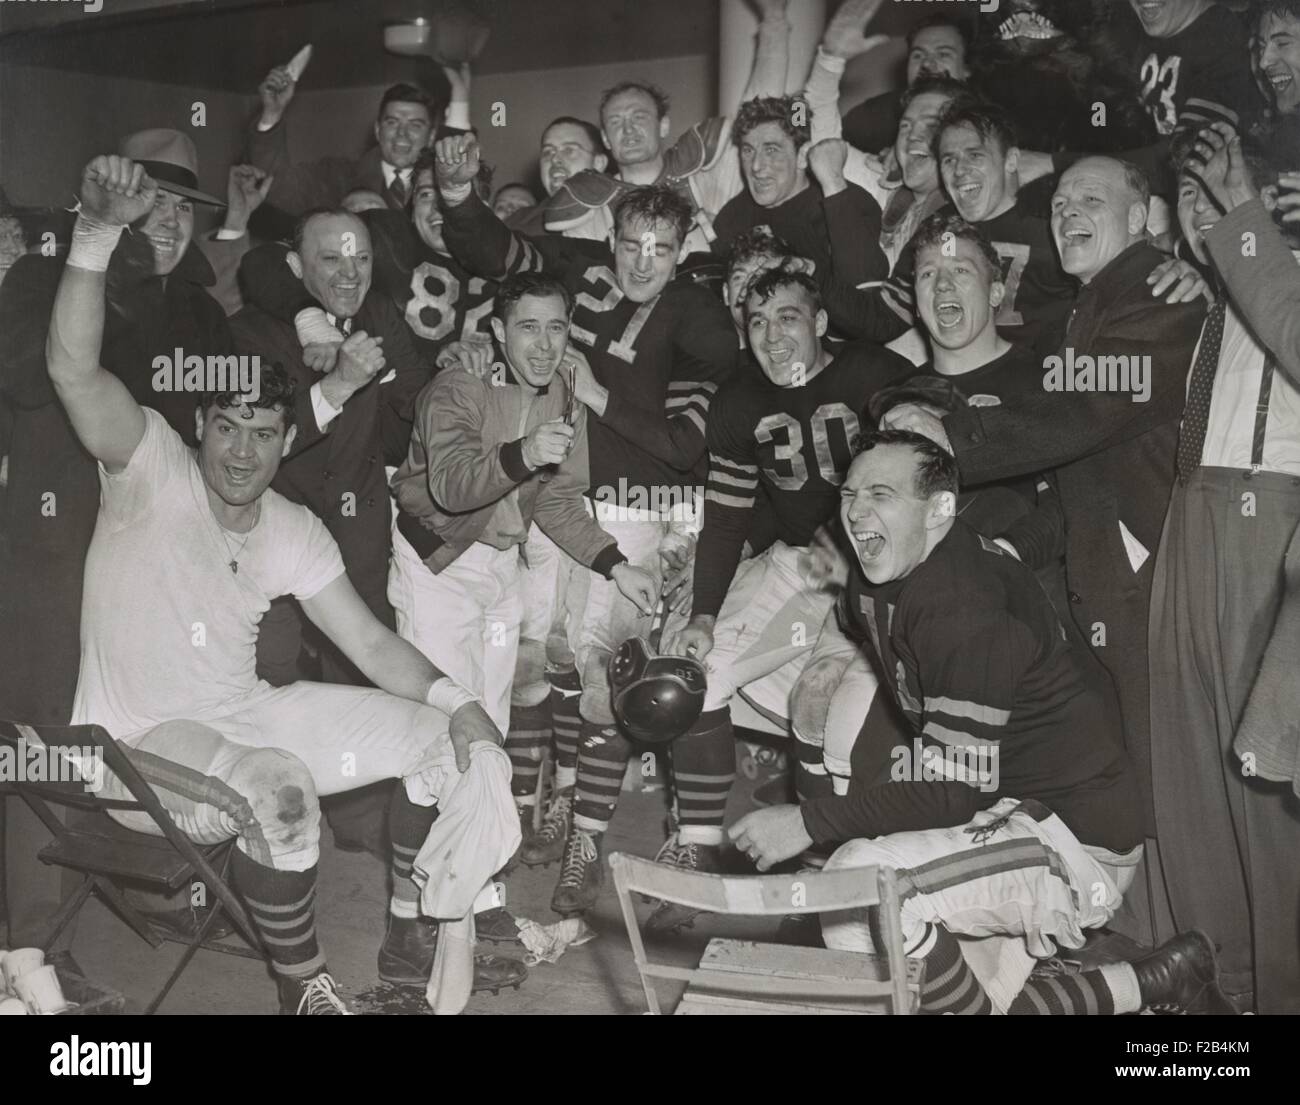 Chicago Bears cheering after beating the Green Bay Packers in the western division playoffs. 2nd from left, standing, is owner-coach George Halas. At far right is line coach Hartley 'Hunk' Anderson. - (BSLOC 2015 1 214) Stock Photo